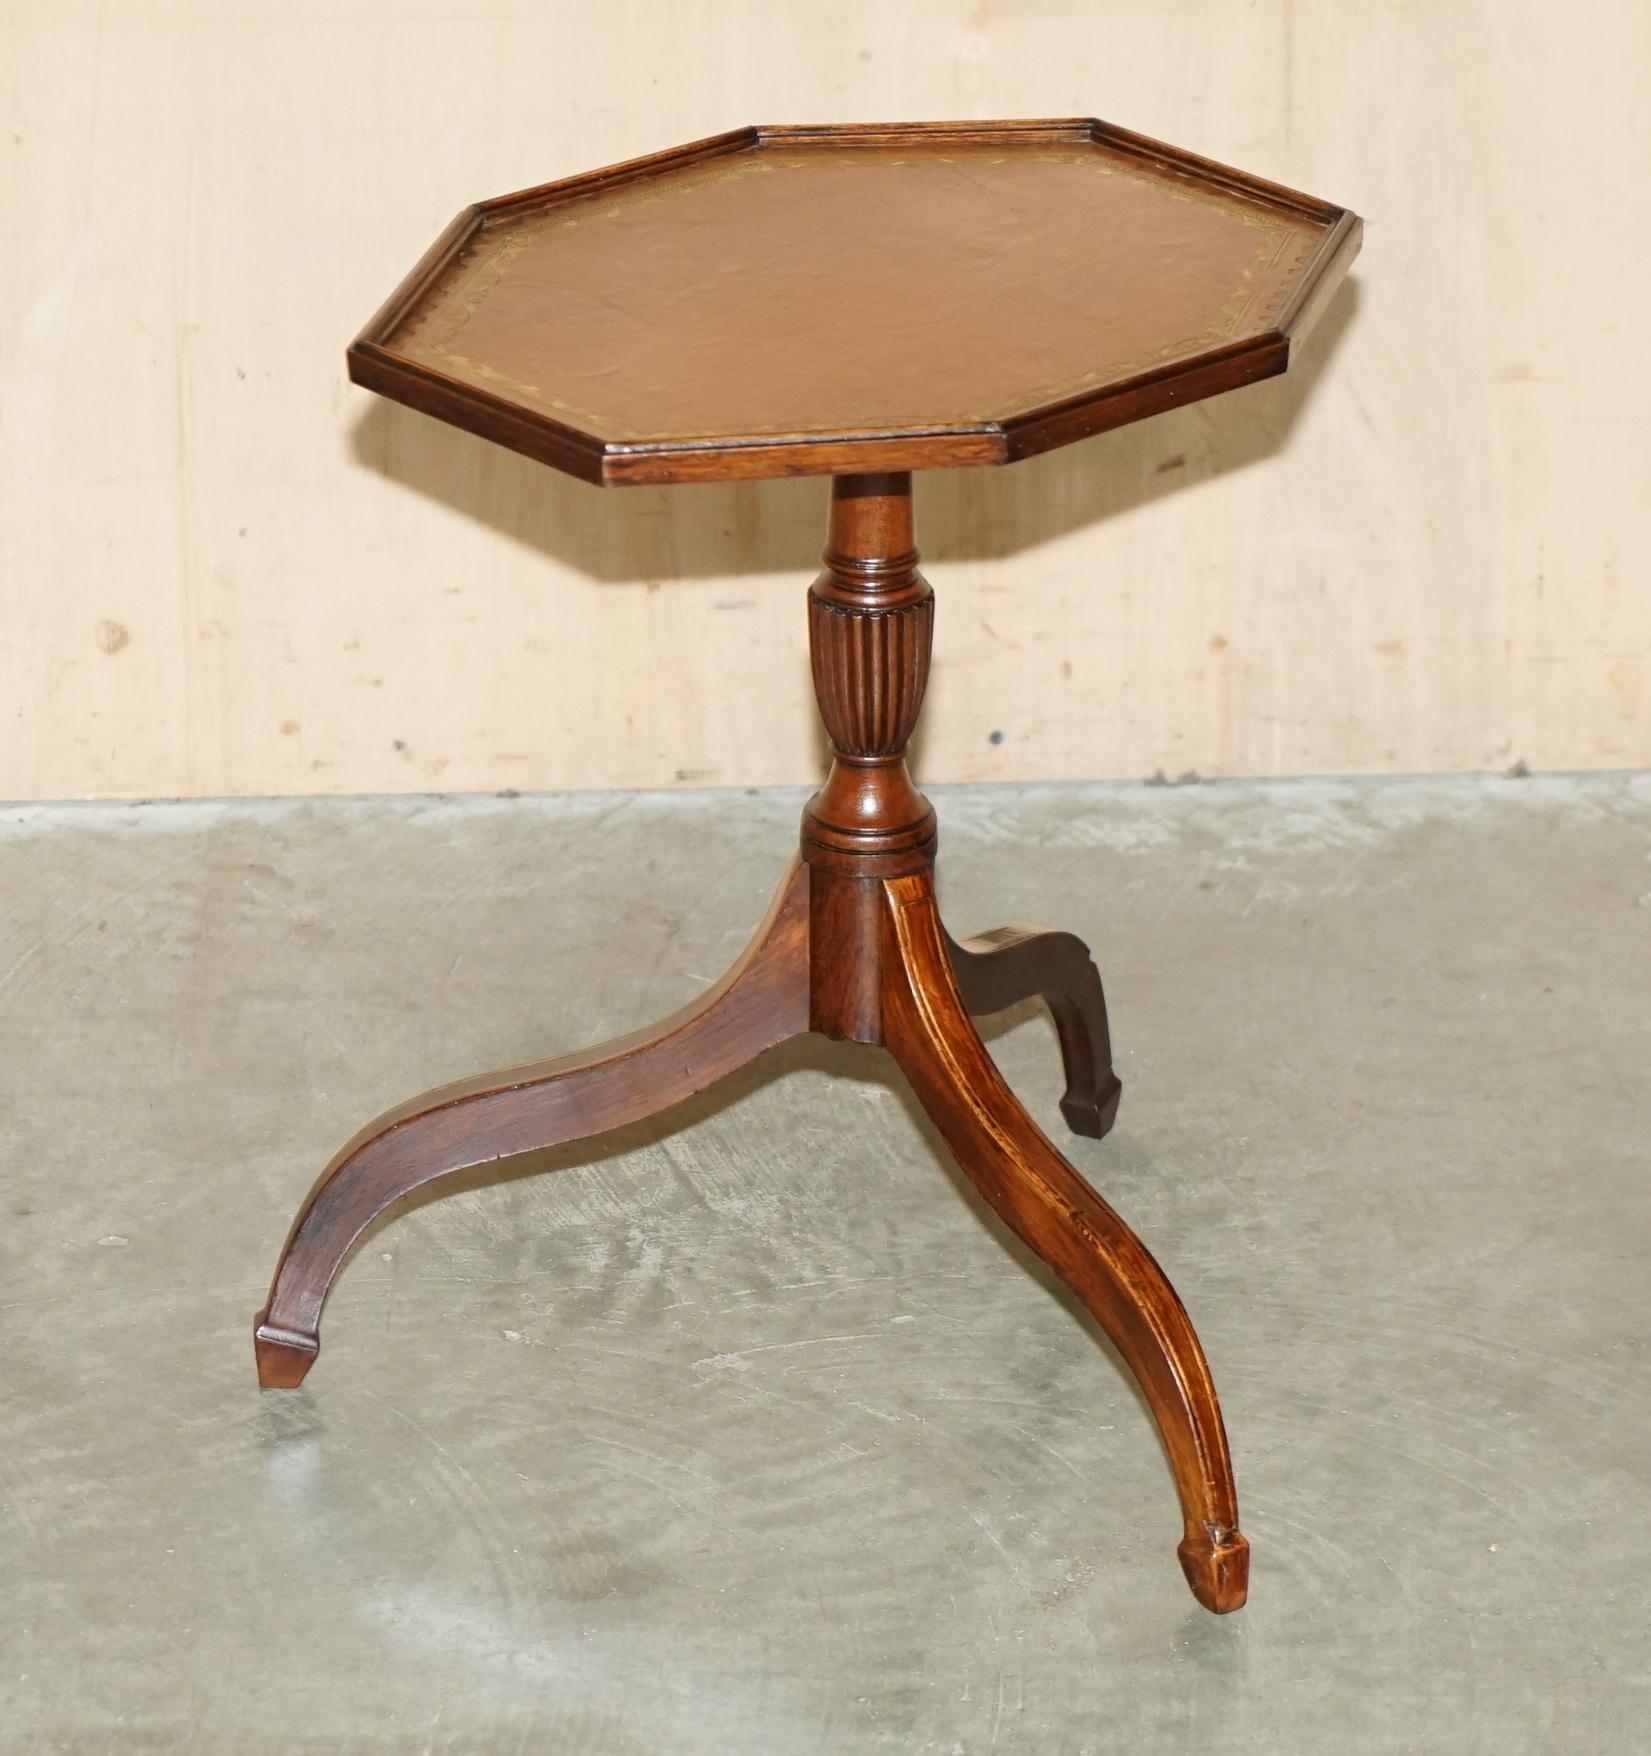 Royal House Antiques

Royal House Antiques is delighted to offer for sale this very nice vintage mahogany & brown leather gold leaf embossed, tripod table with rare octagonal oval top

Please note the delivery fee listed is just a guide, it covers